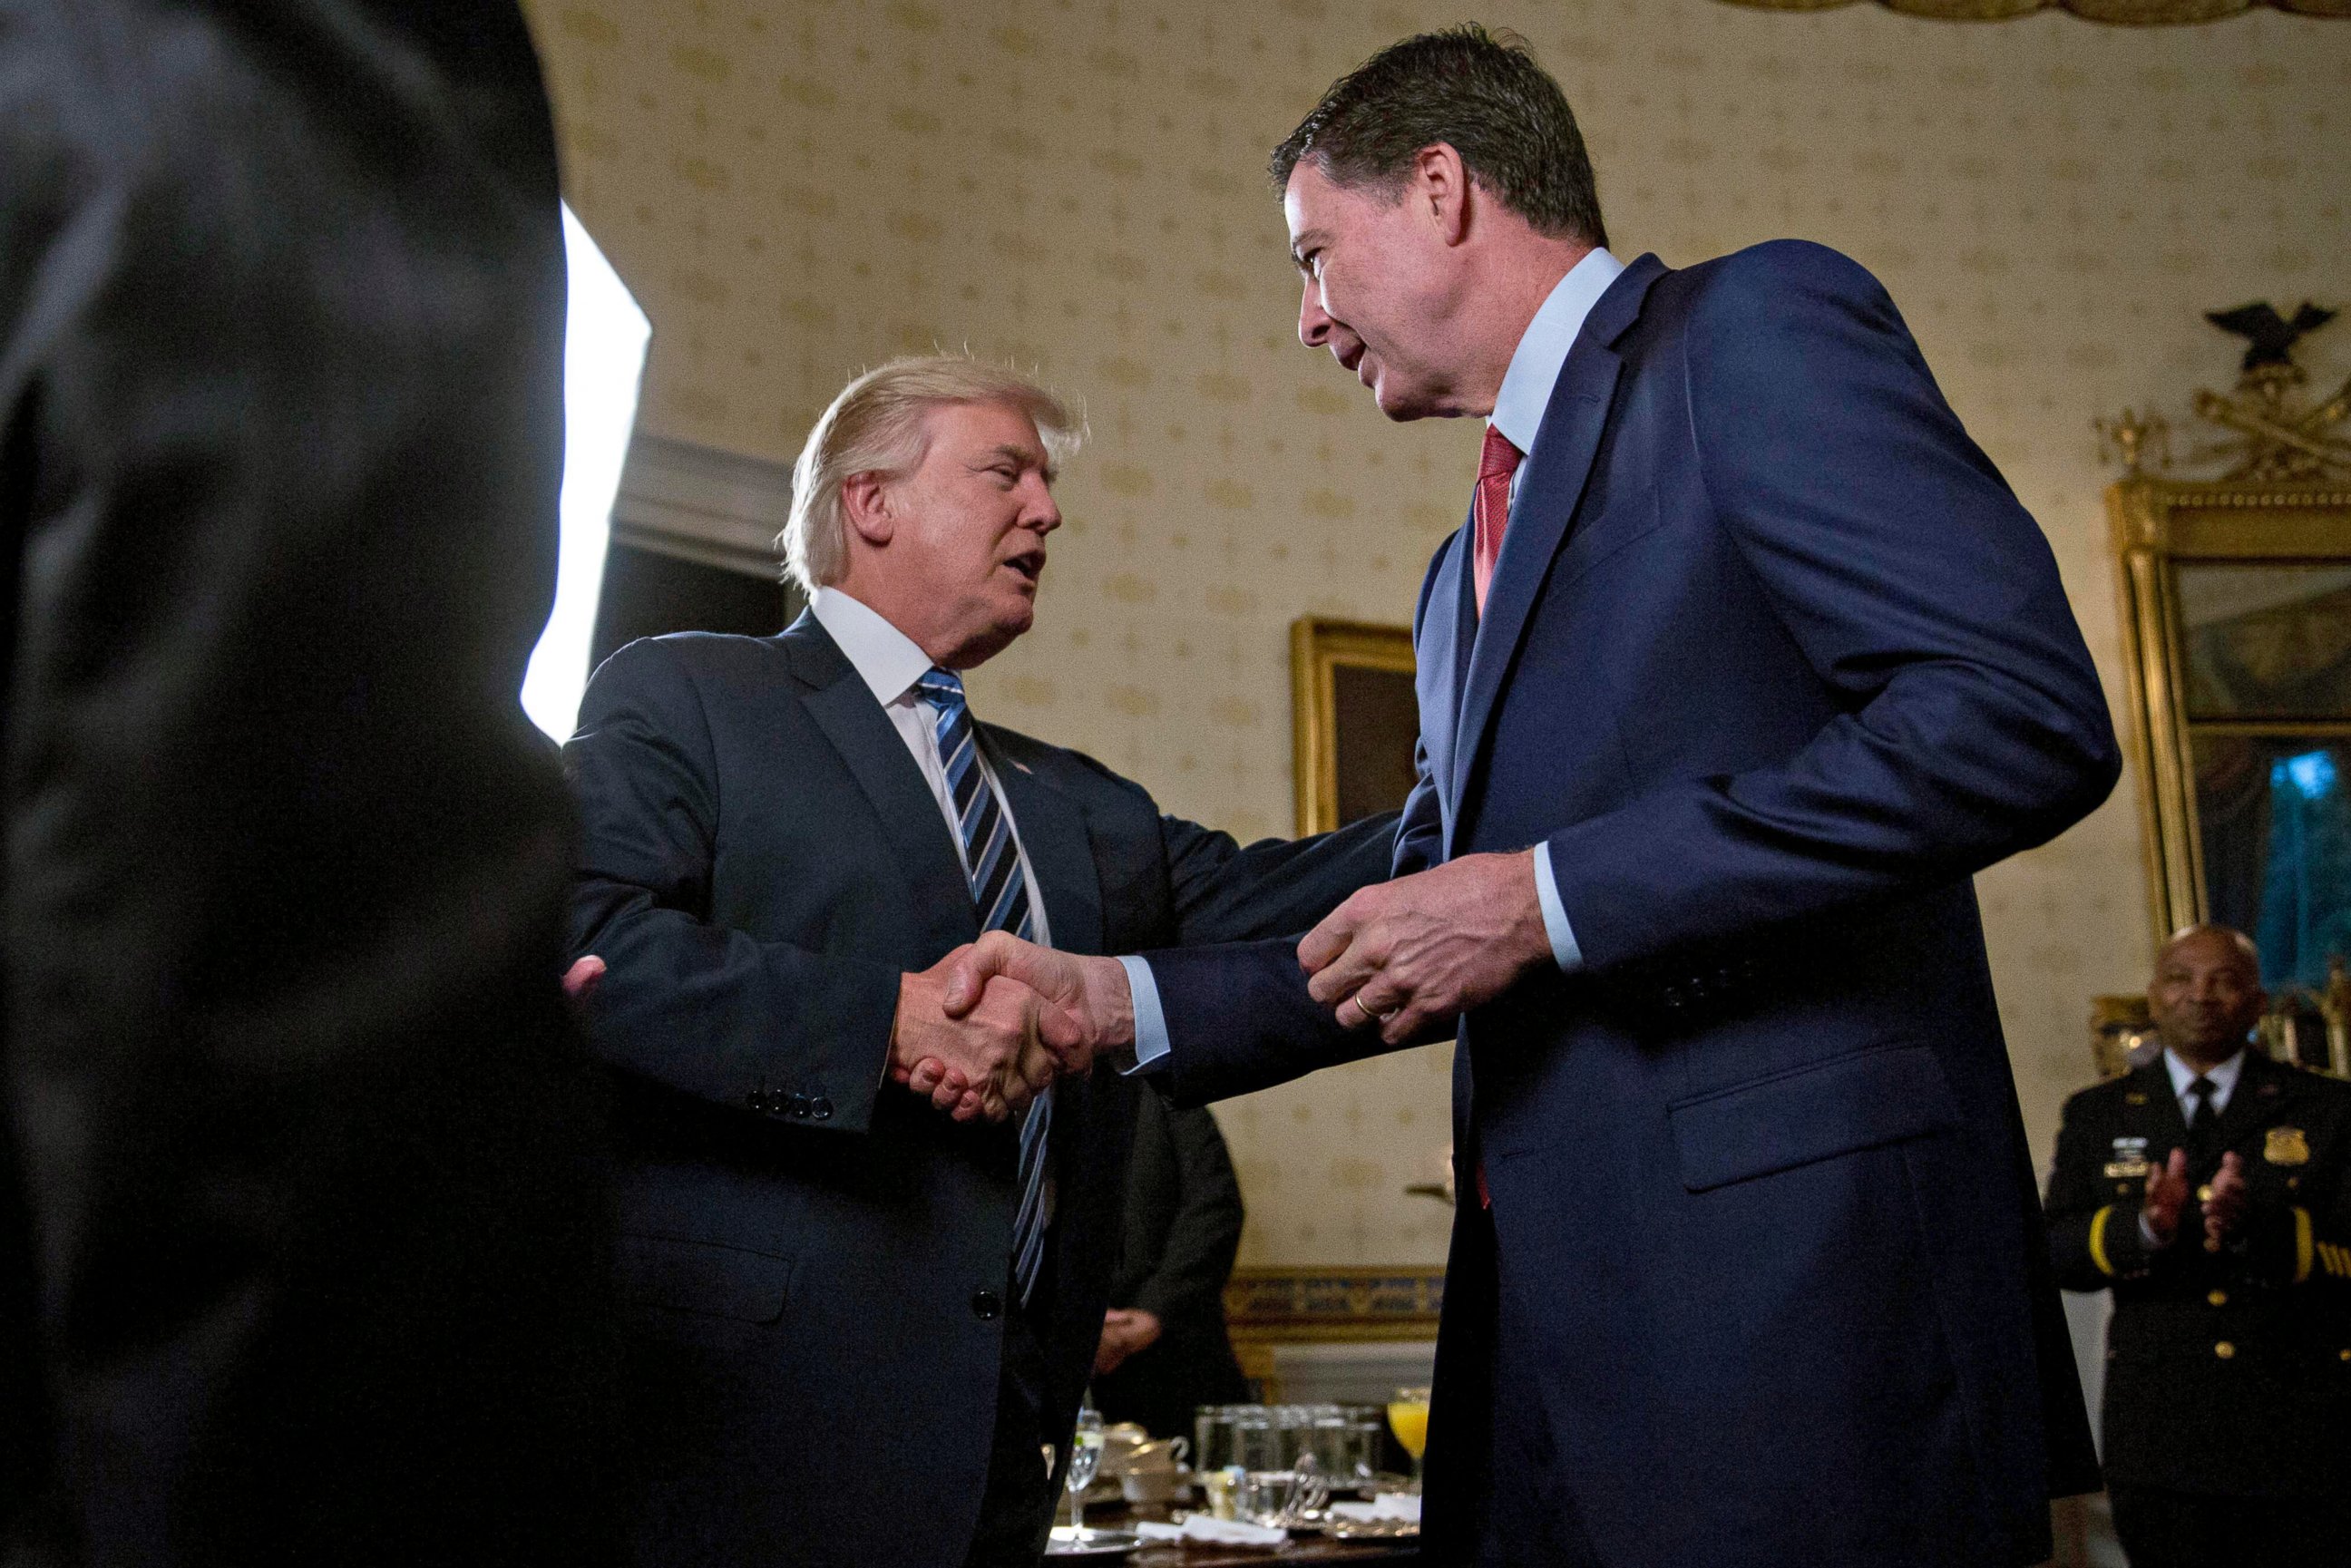 PHOTO: President Donald Trump shakes hands with James Comey, director of the Federal Bureau of Investigation, during an Inaugural Law Enforcement Officers and First Responders Reception in the Blue Room of the White House, Jan. 22, 2017, in Washington.